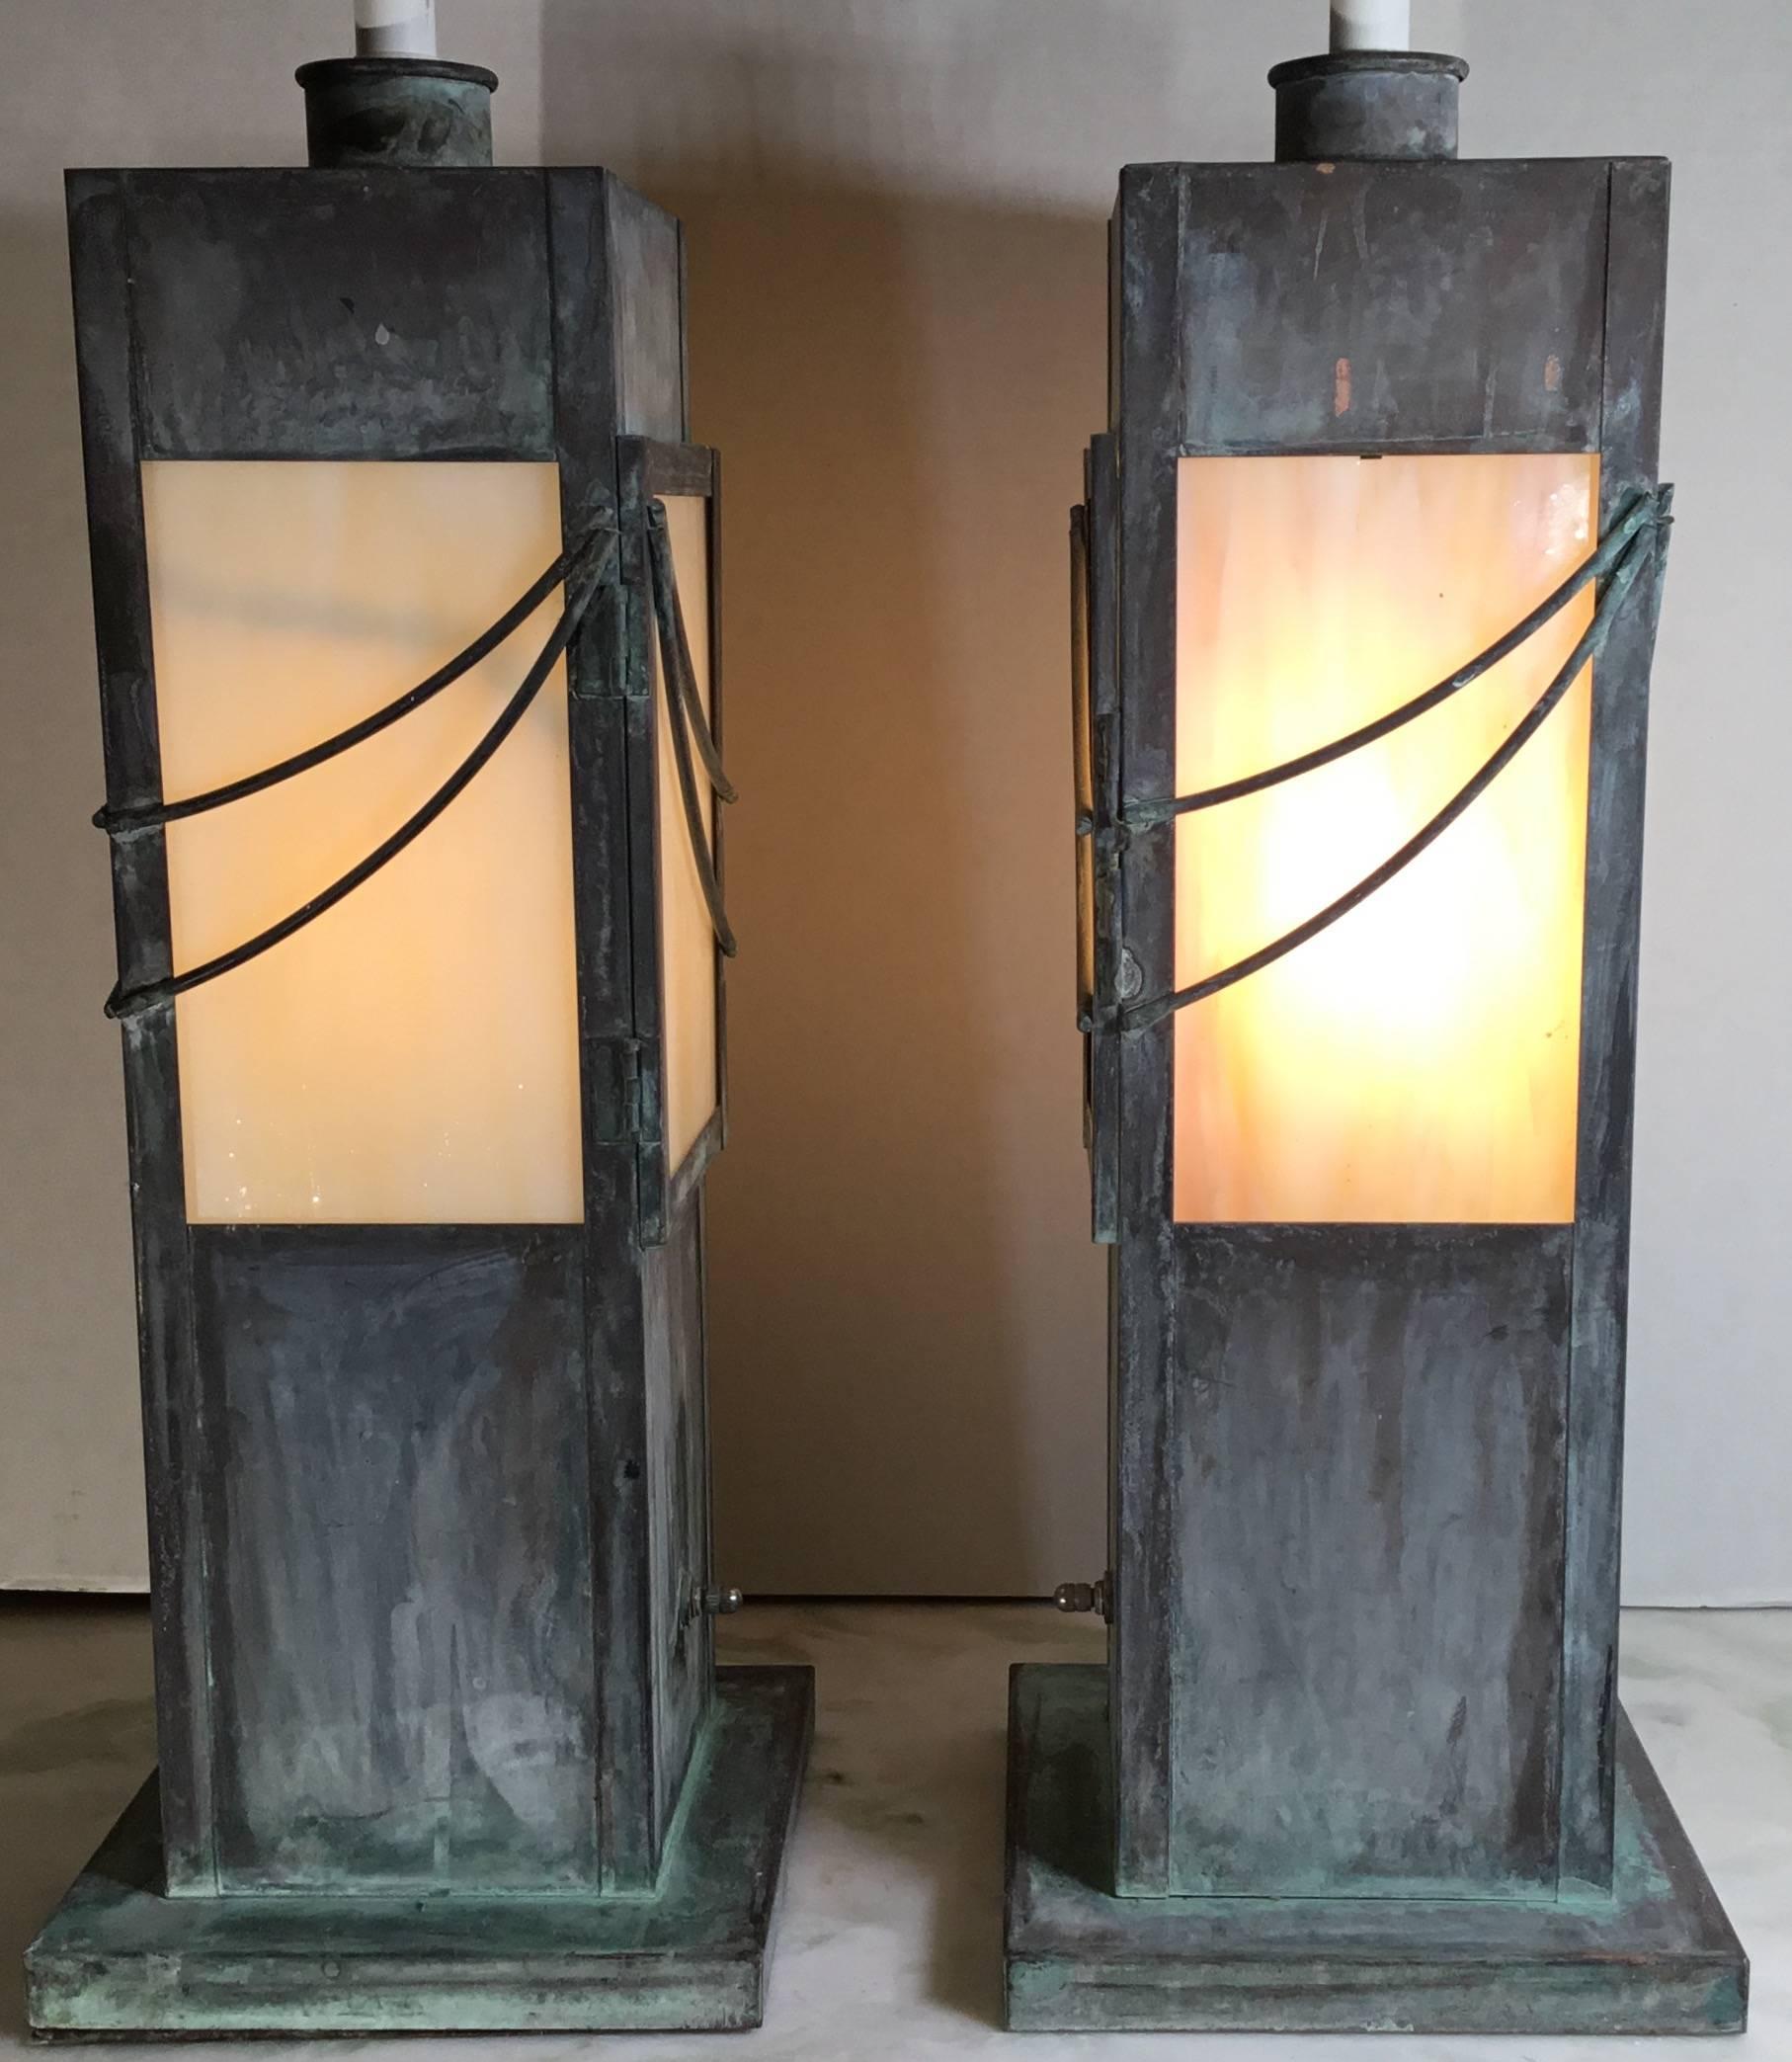 Pair of midcentury copper table lamps, artistically made of copper and decorative glass. With extra
Inside socket of 40/ watt and 60 /watt light on the top.